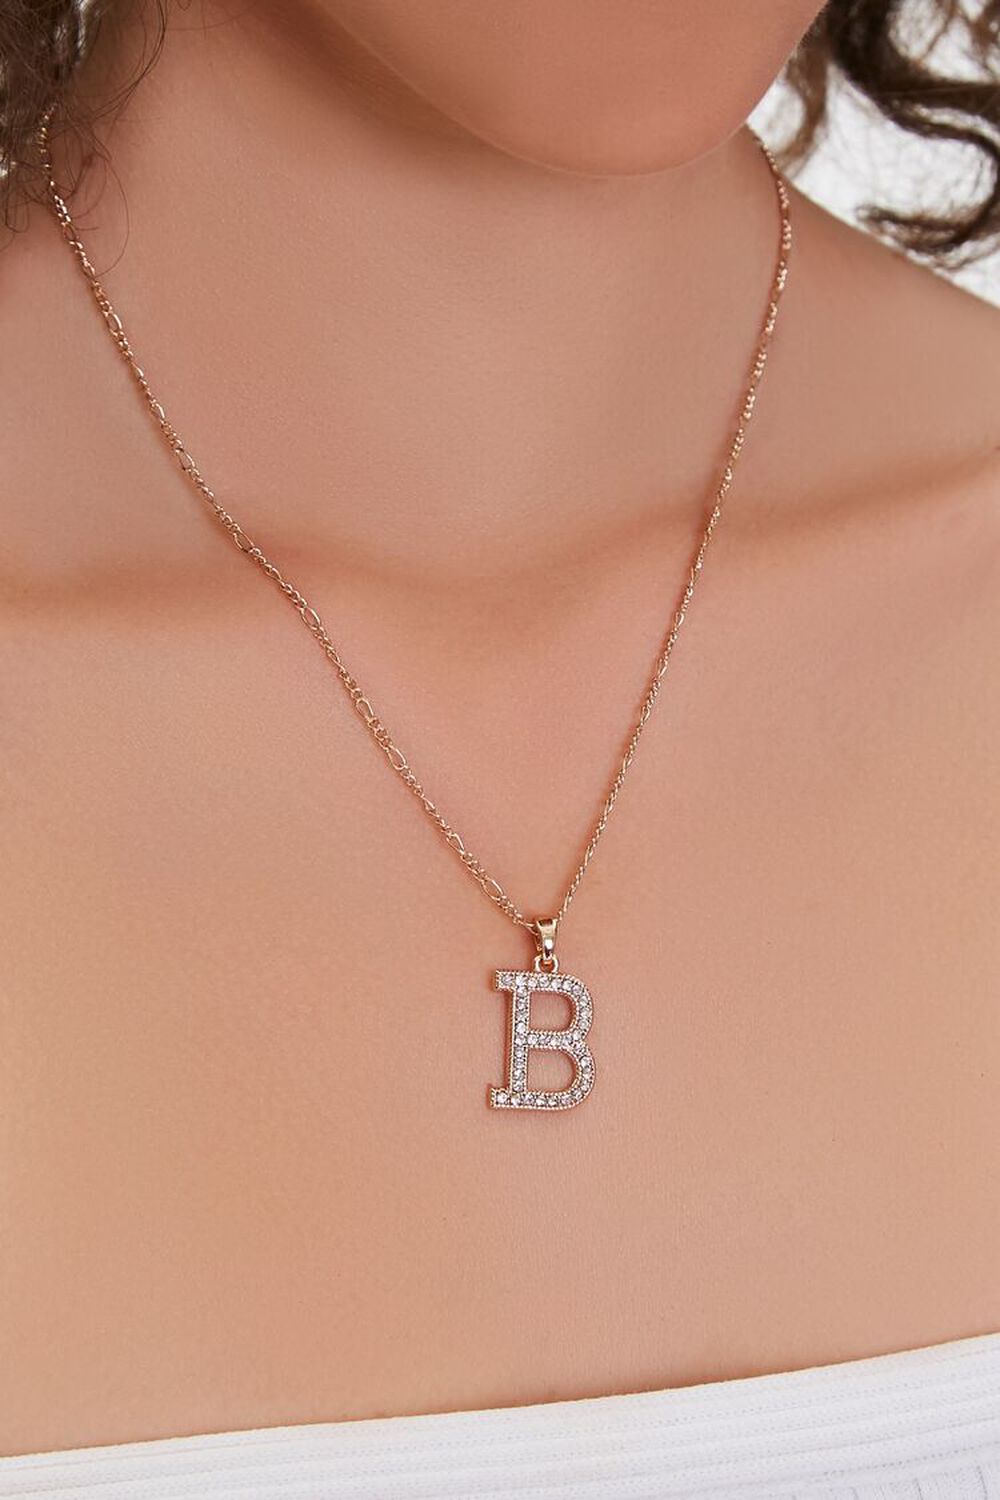 GOLD/B Initial Pendant Necklace, image 1